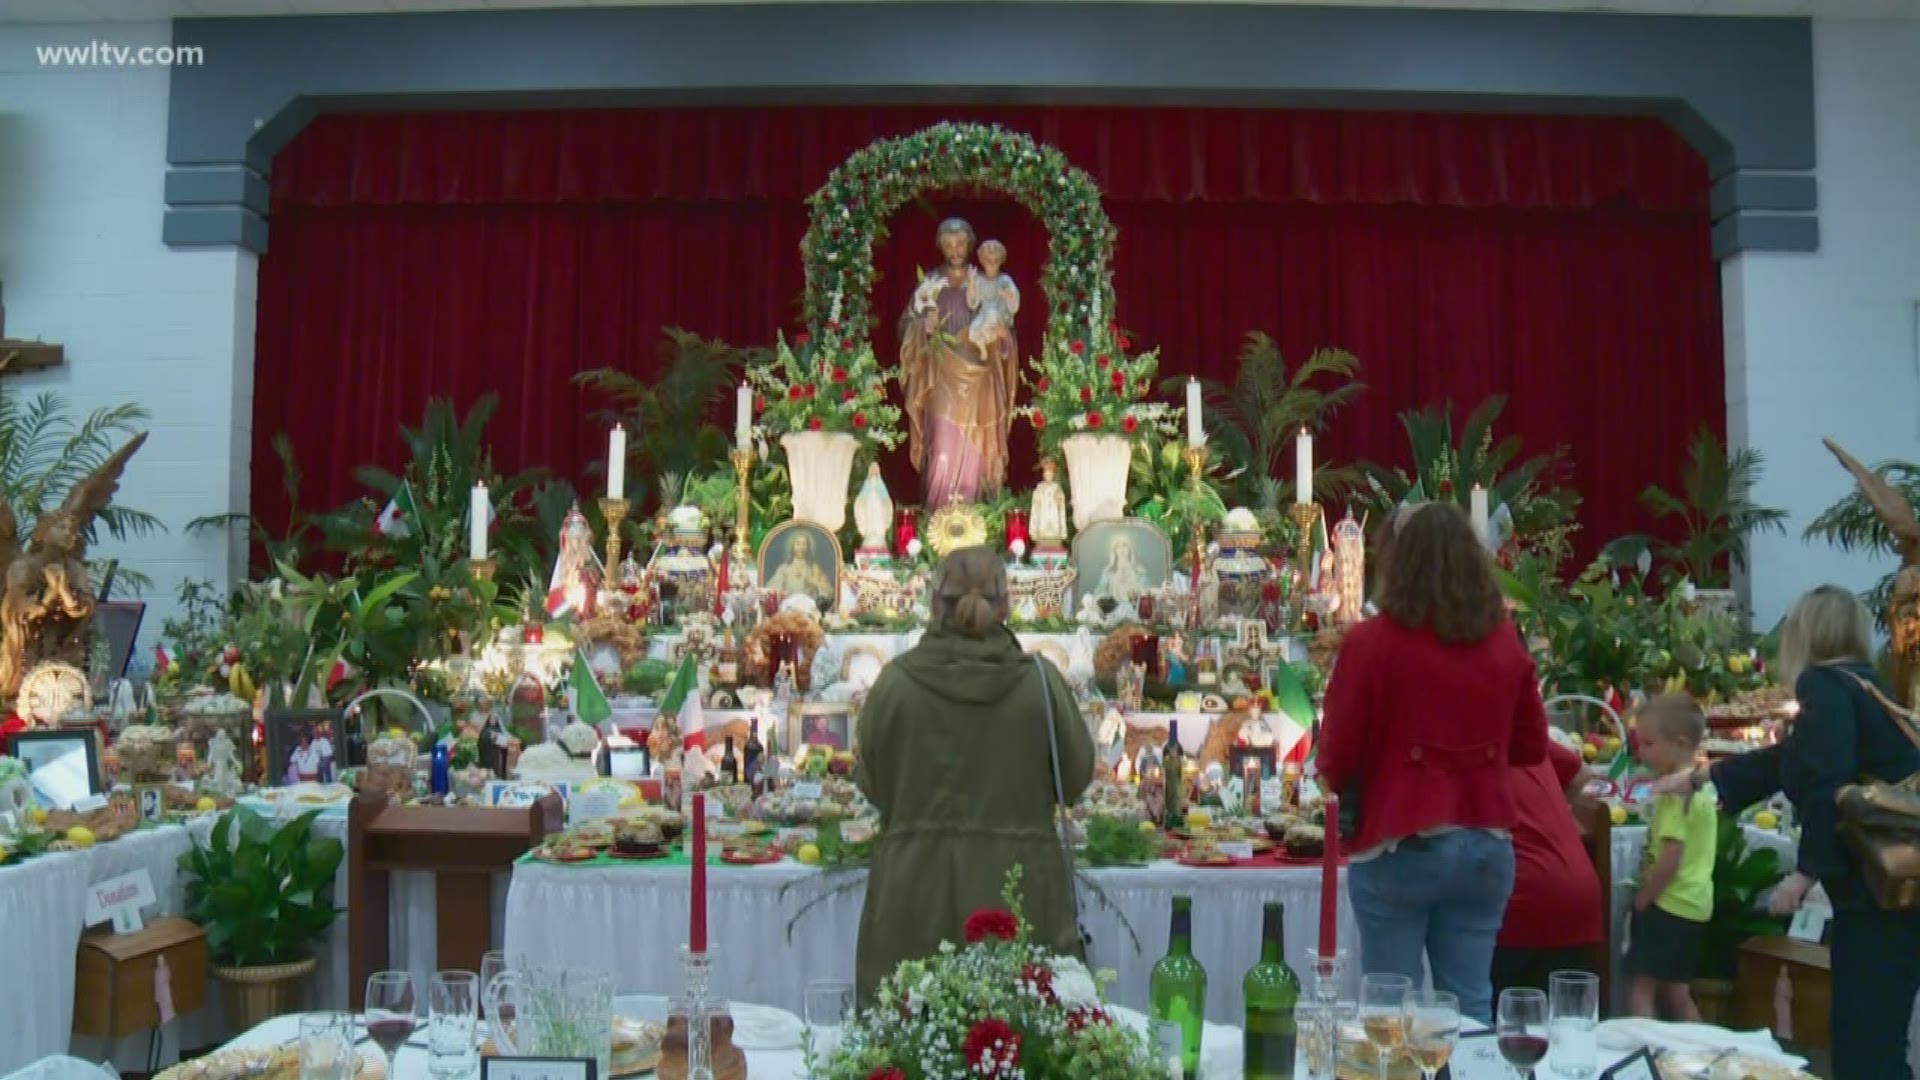 St. Joseph's feast day is celebrated across New Orleans March 19 with elaborate altars, continuing a custom that originated in Sicily. The St. Joseph's altar at St. Francis Xavier Church in Metairie is among the area's largest.